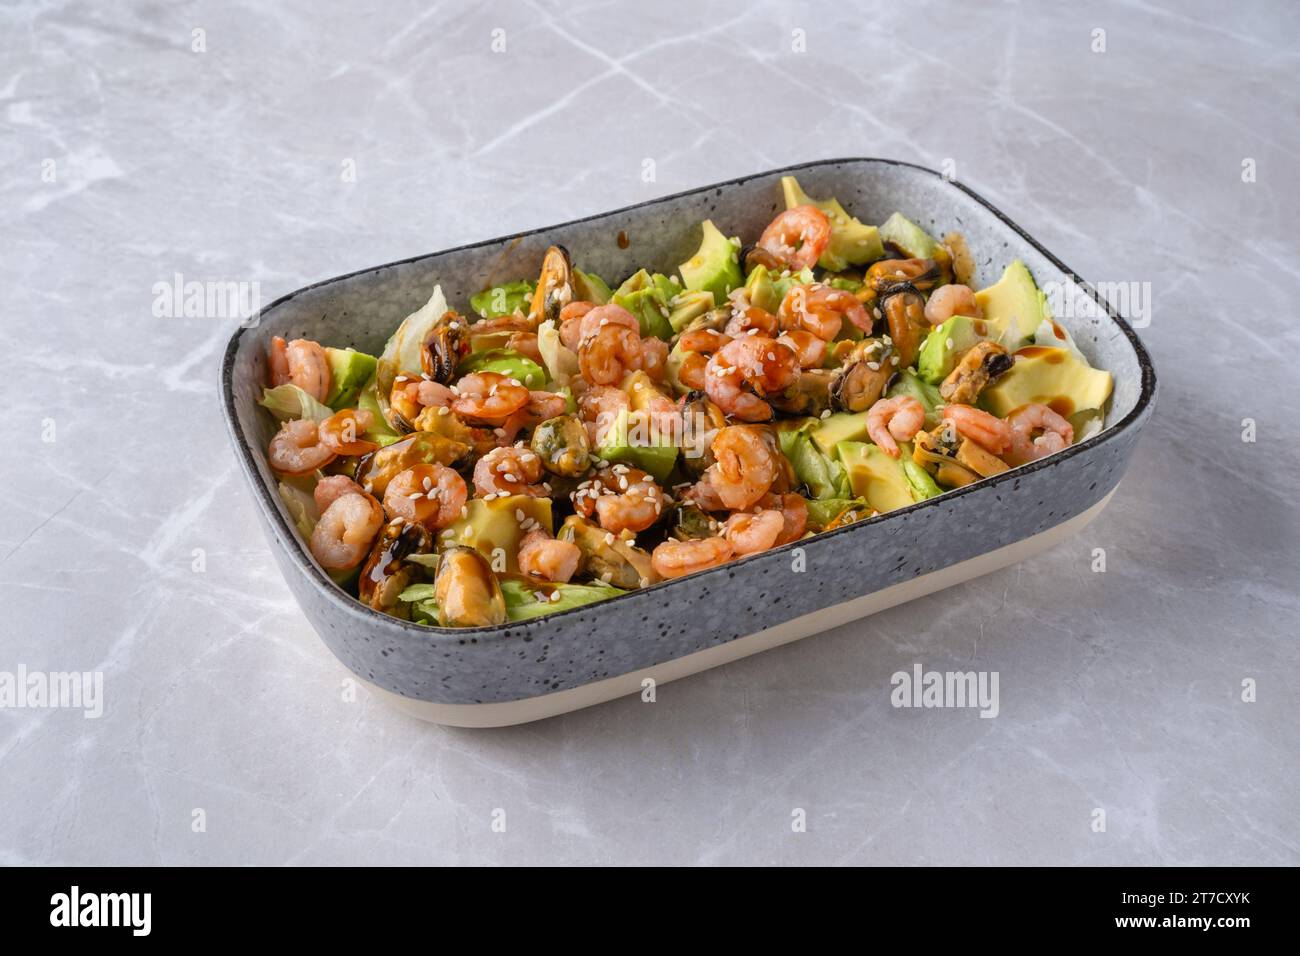 Bowl with iceberg lettuce salad with shrimp, mussels and avocado Stock Photo